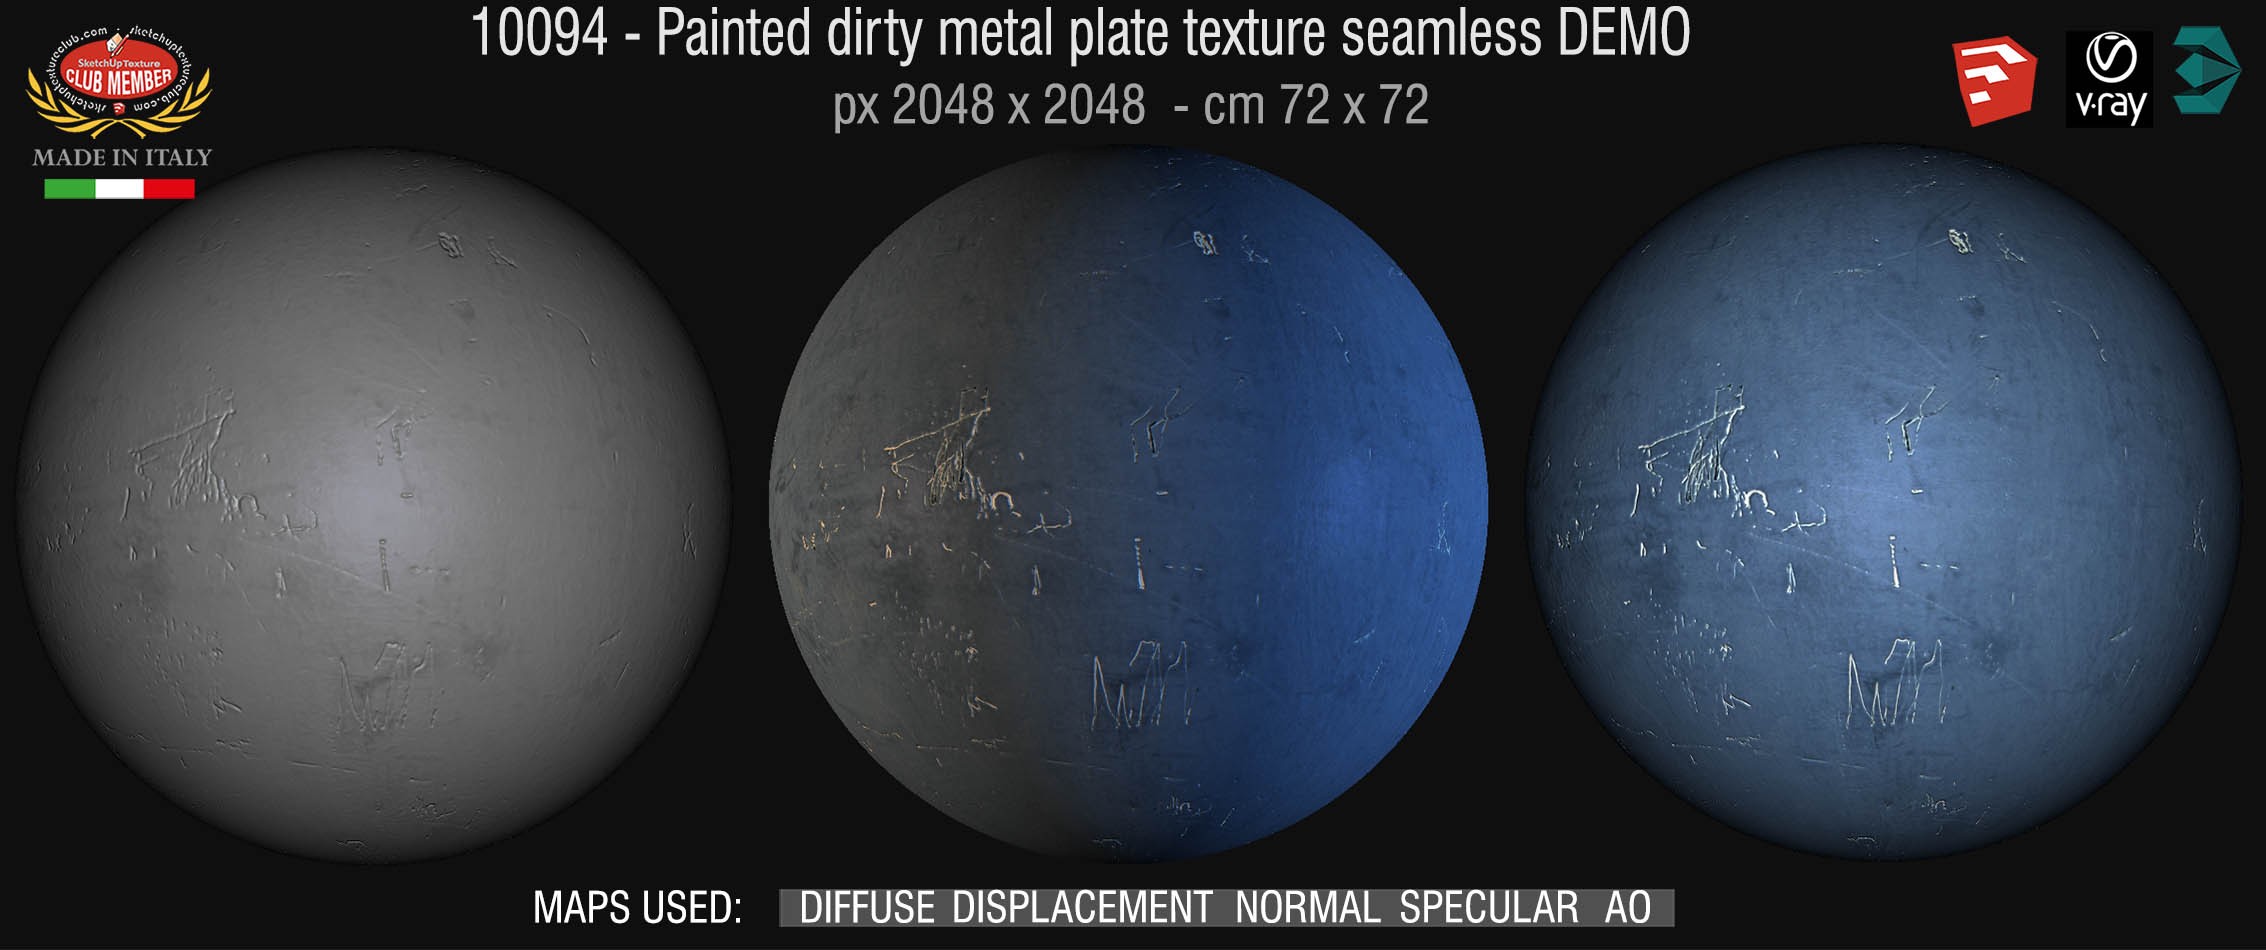 10094 HR Painted dirty metal texture seamless + maps DEMO